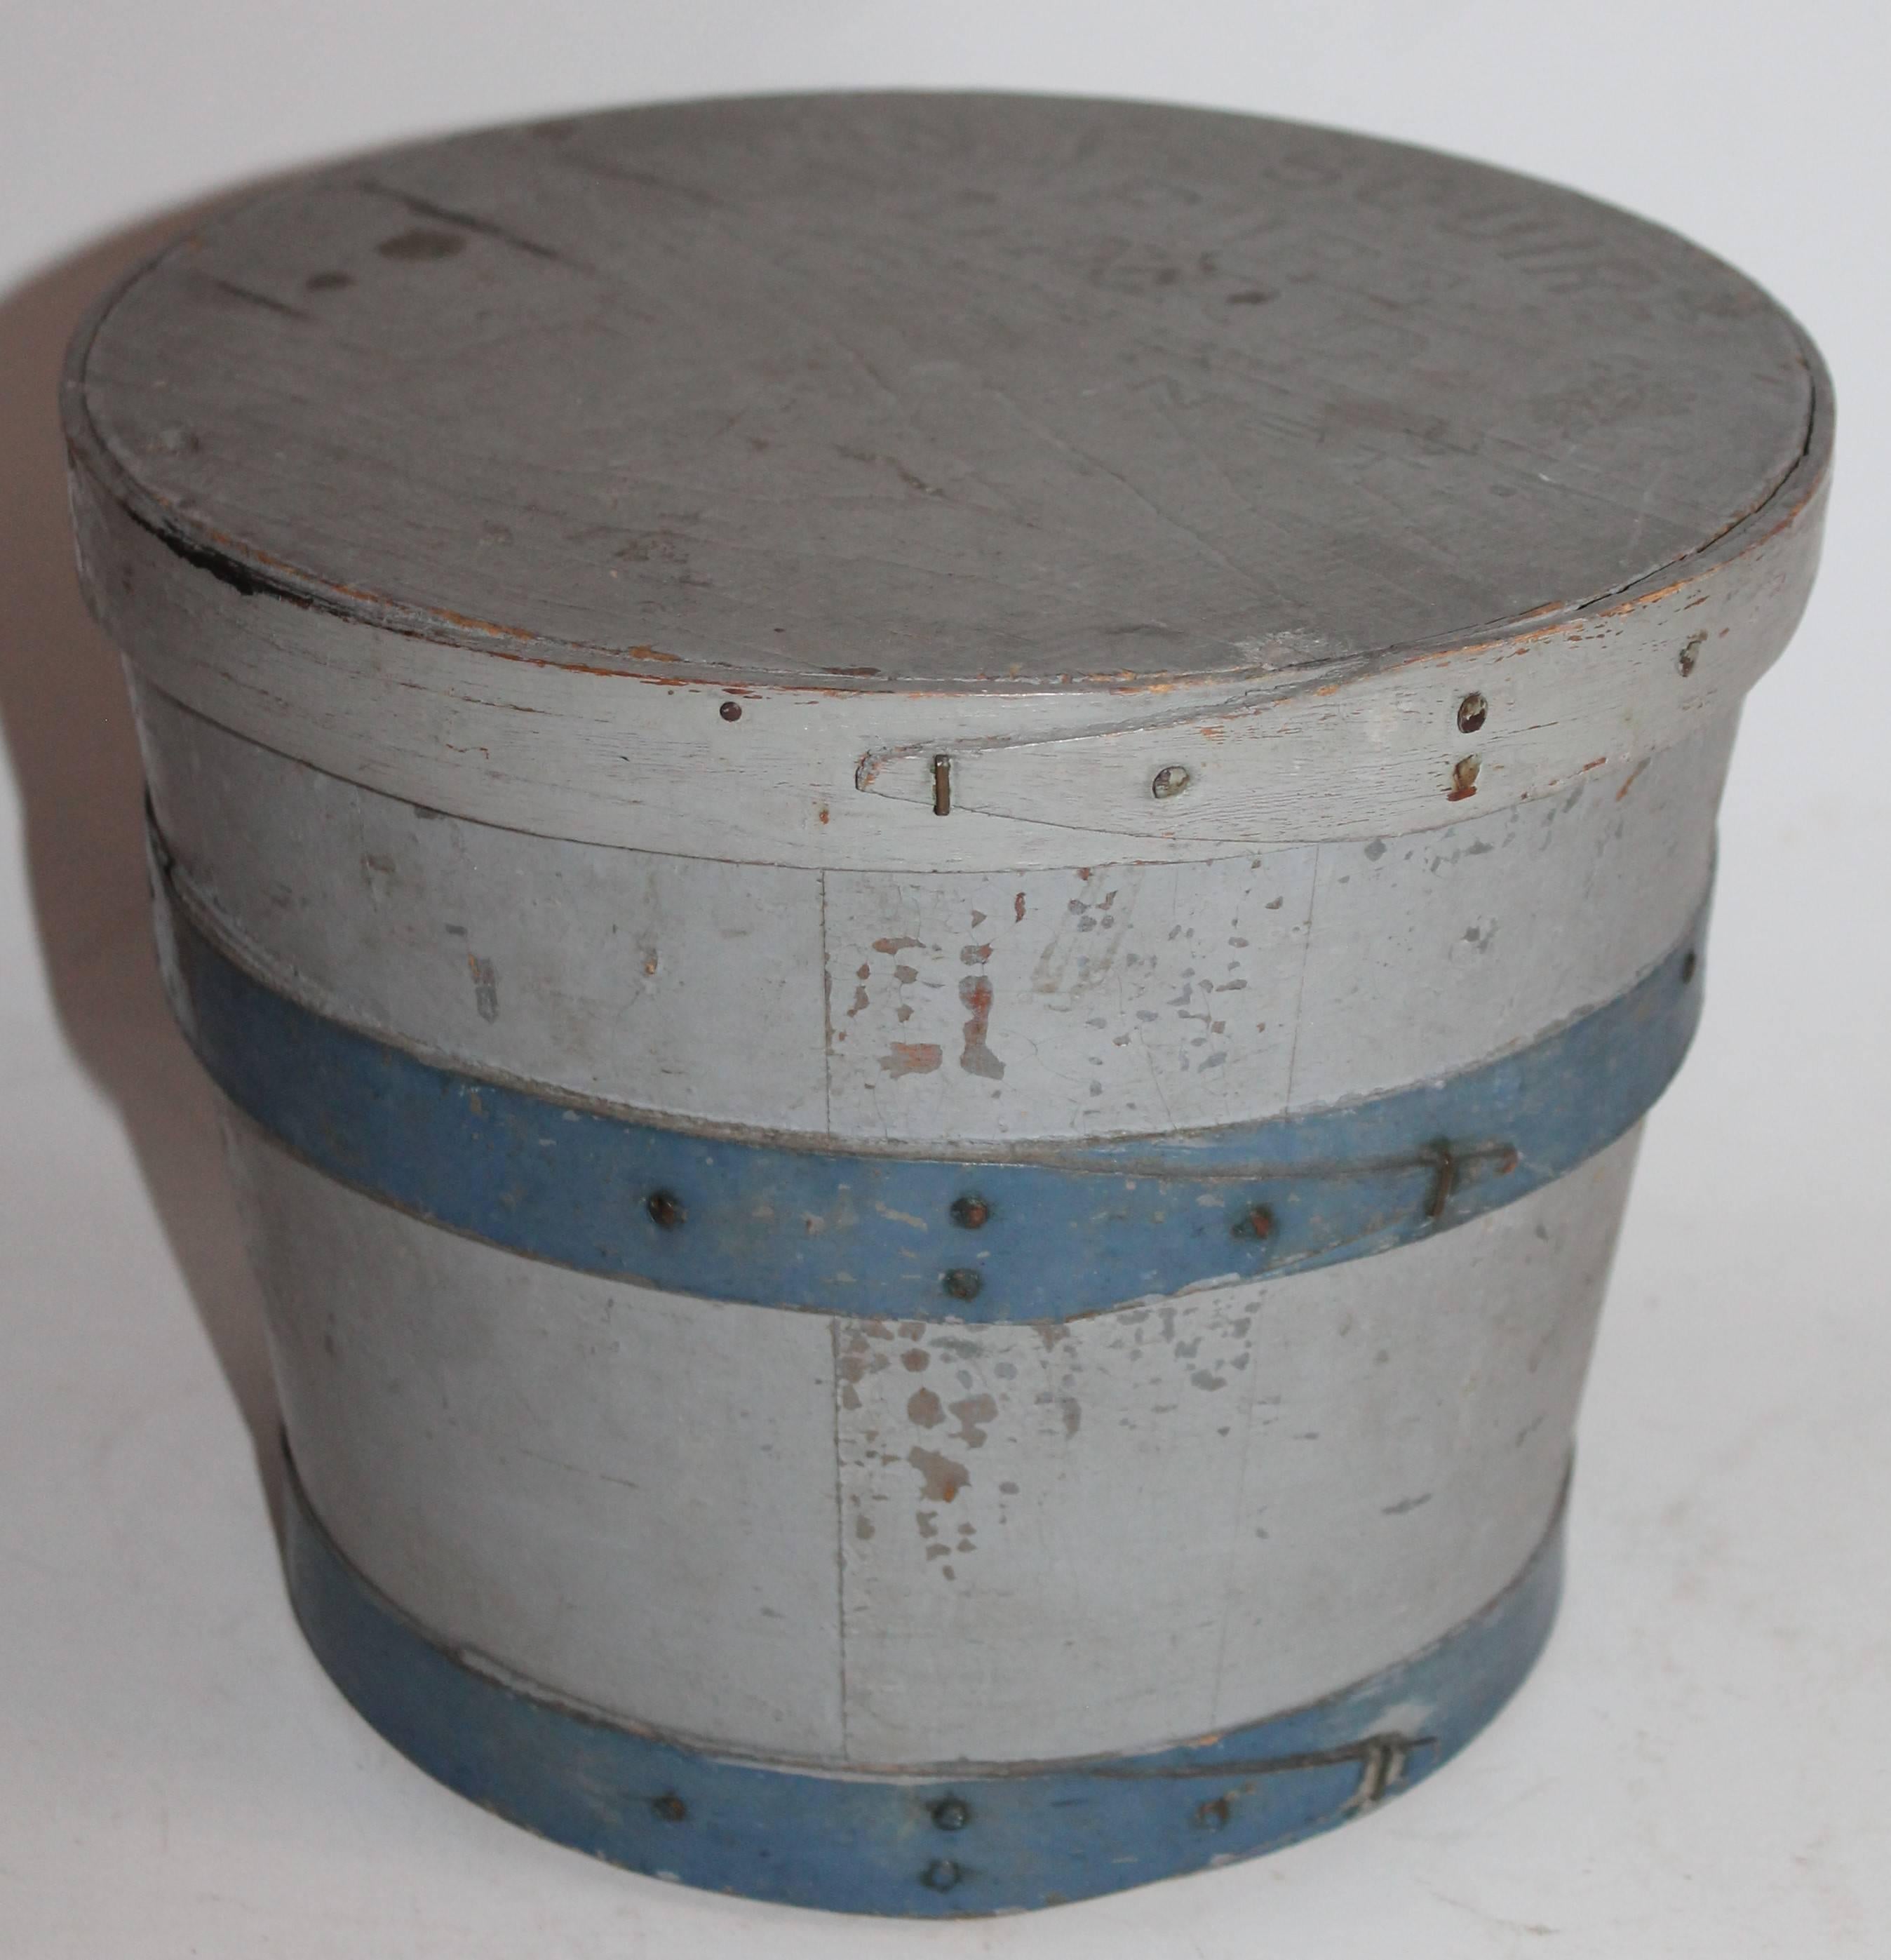 This 19th century lard bucket in original blue and grey painted surface is in fine as found condition. The lid is stamped P.Square Pure Lard Co. under the painted surface. Fantastic striped surface.